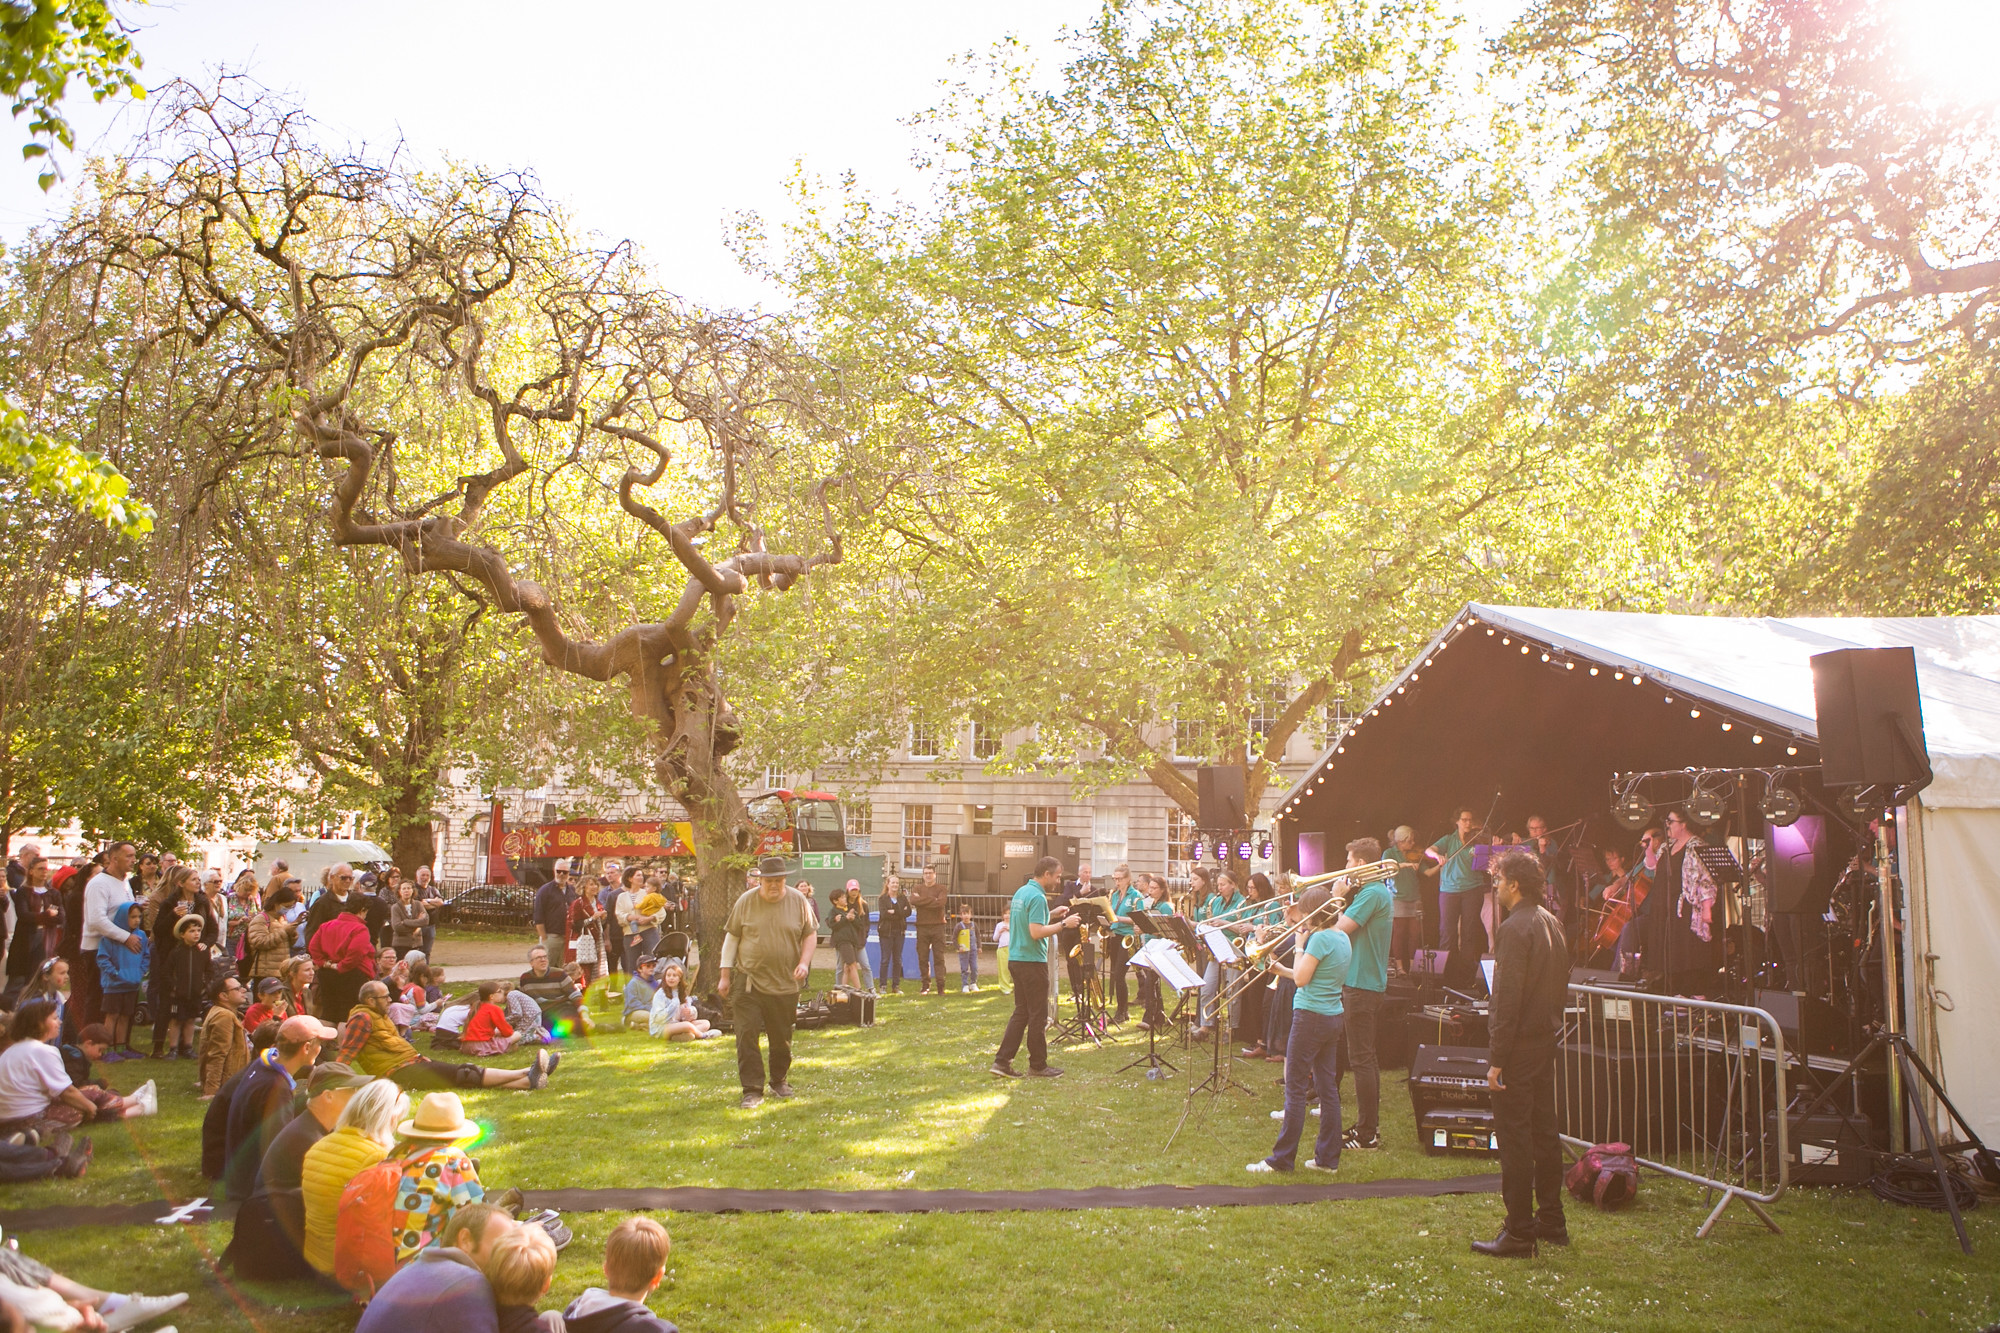 A crowd of people stood and sat on the grass at Queen Square watching a band onstage